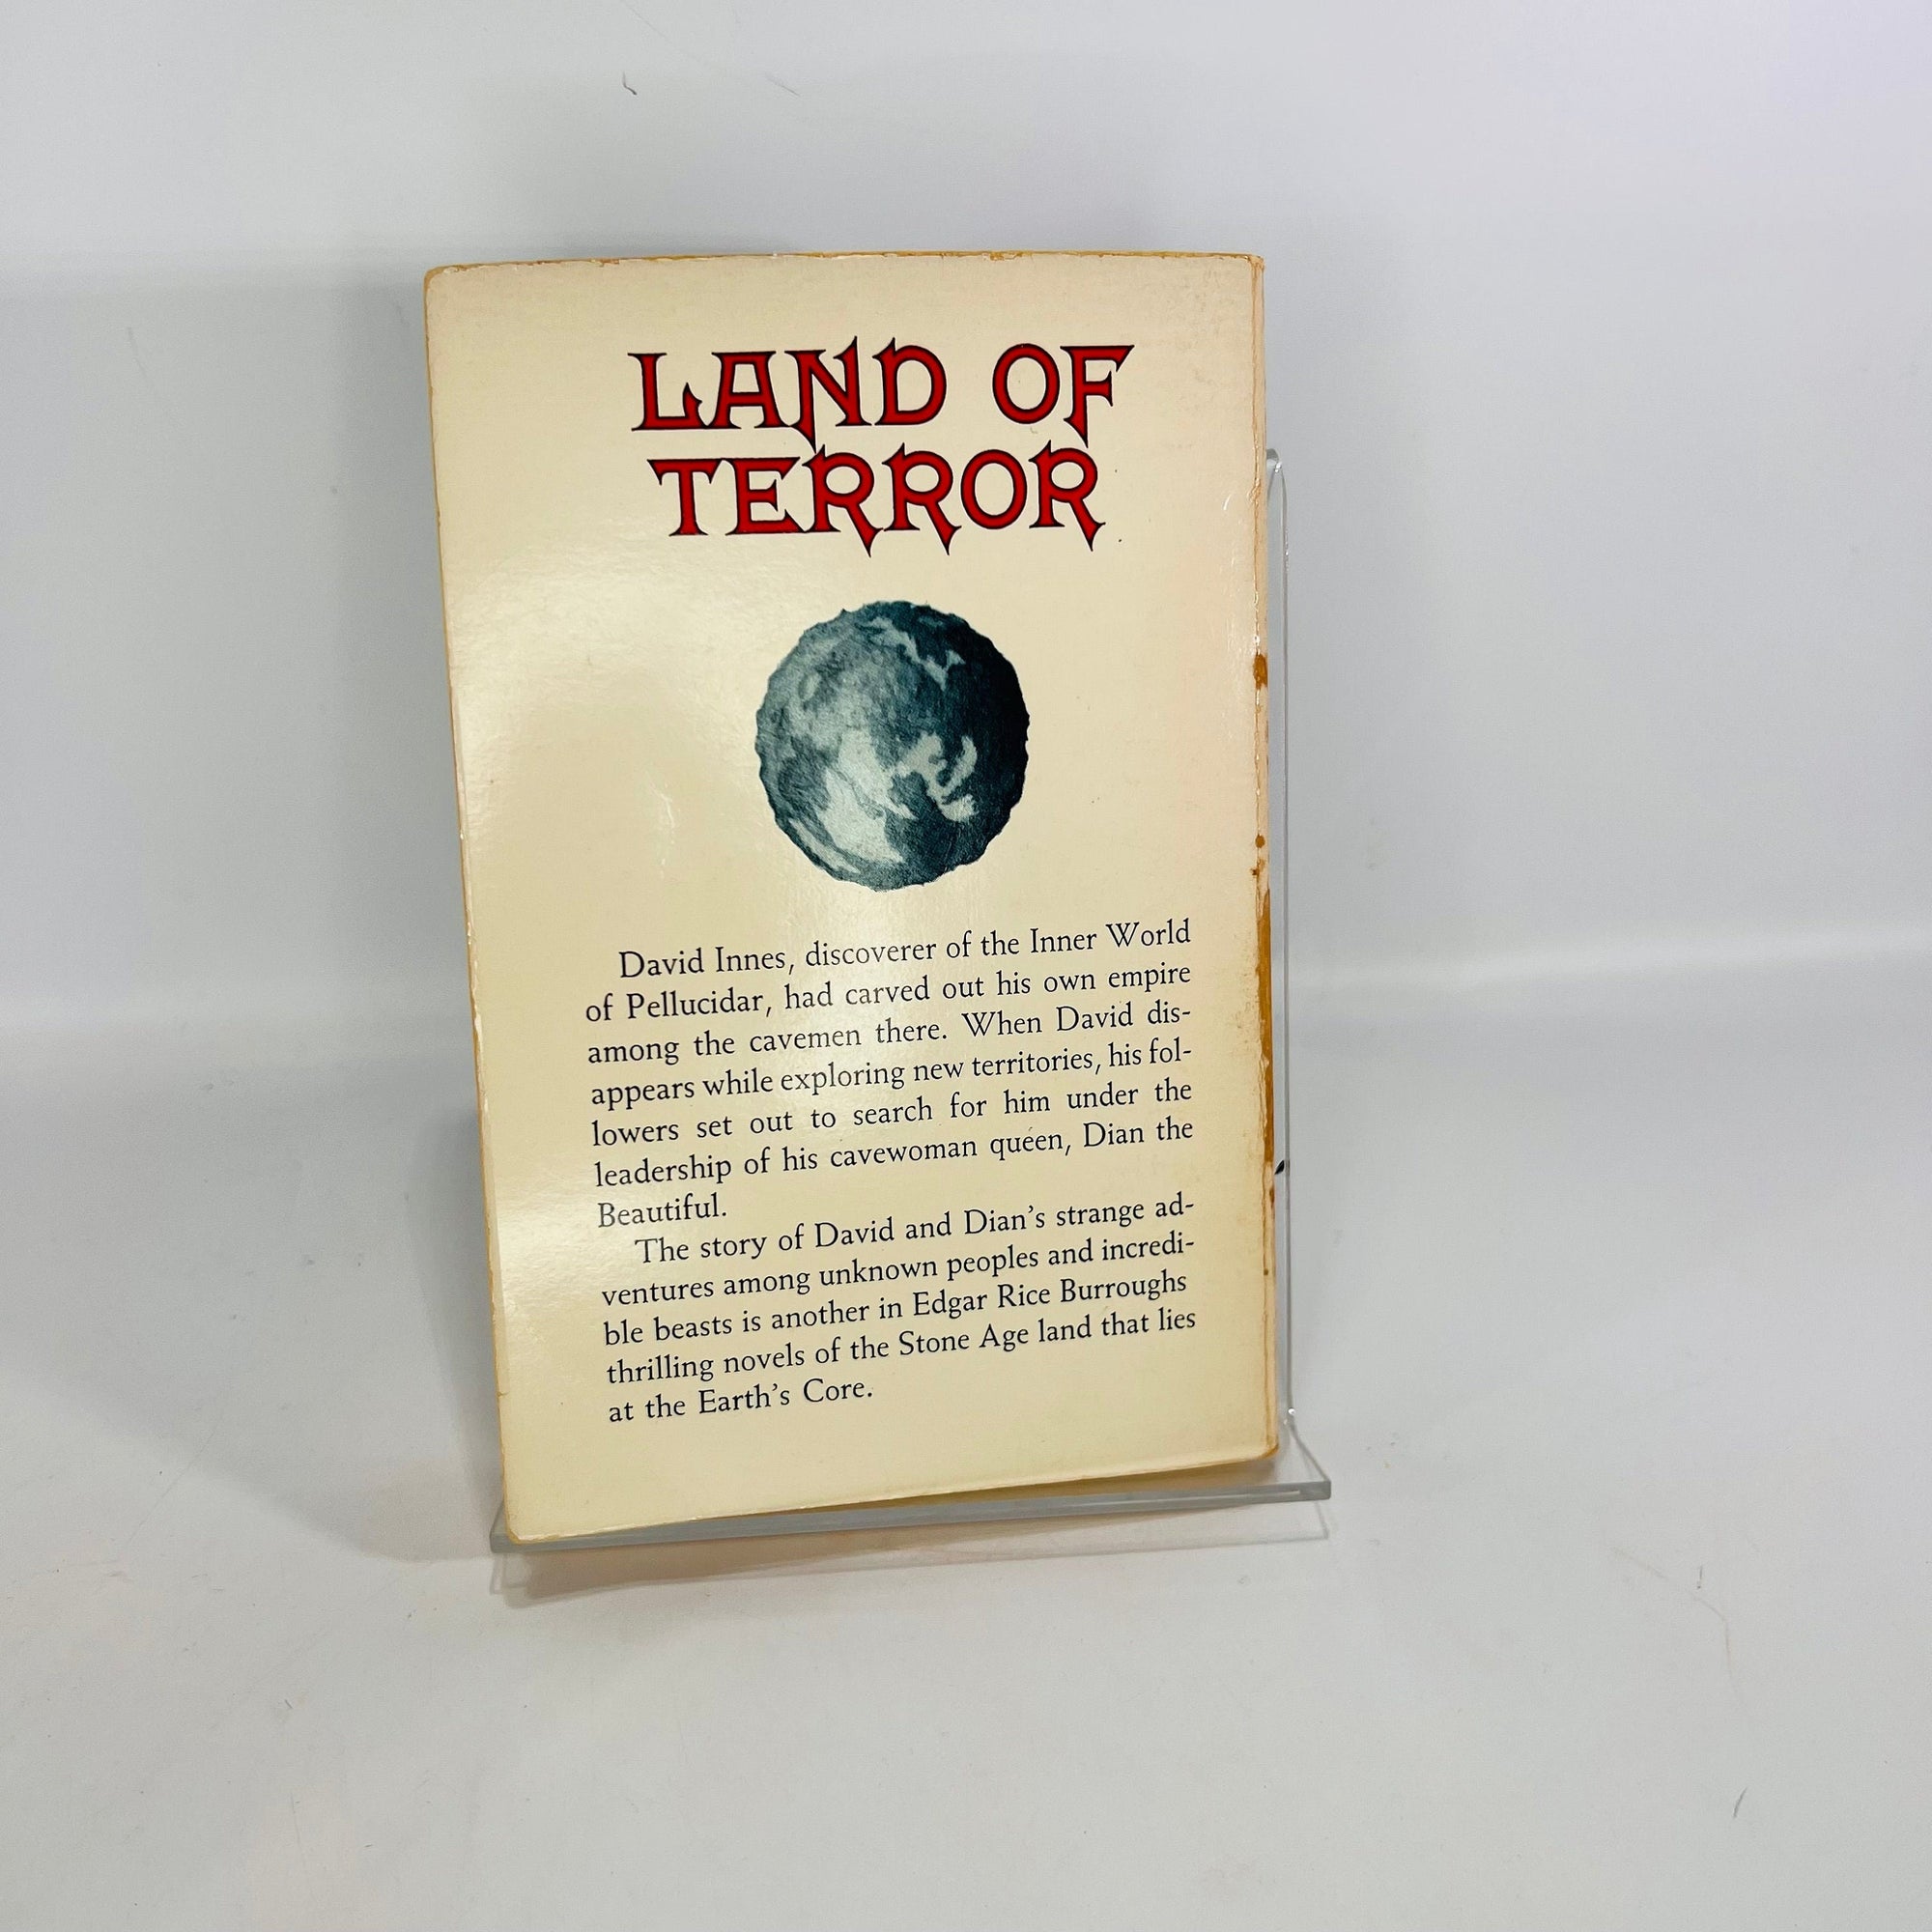 Land of Terror by Edgar Rice Burroughs 1944 Part of the Pellucidar #6  Series Ace Books Inc. F-256